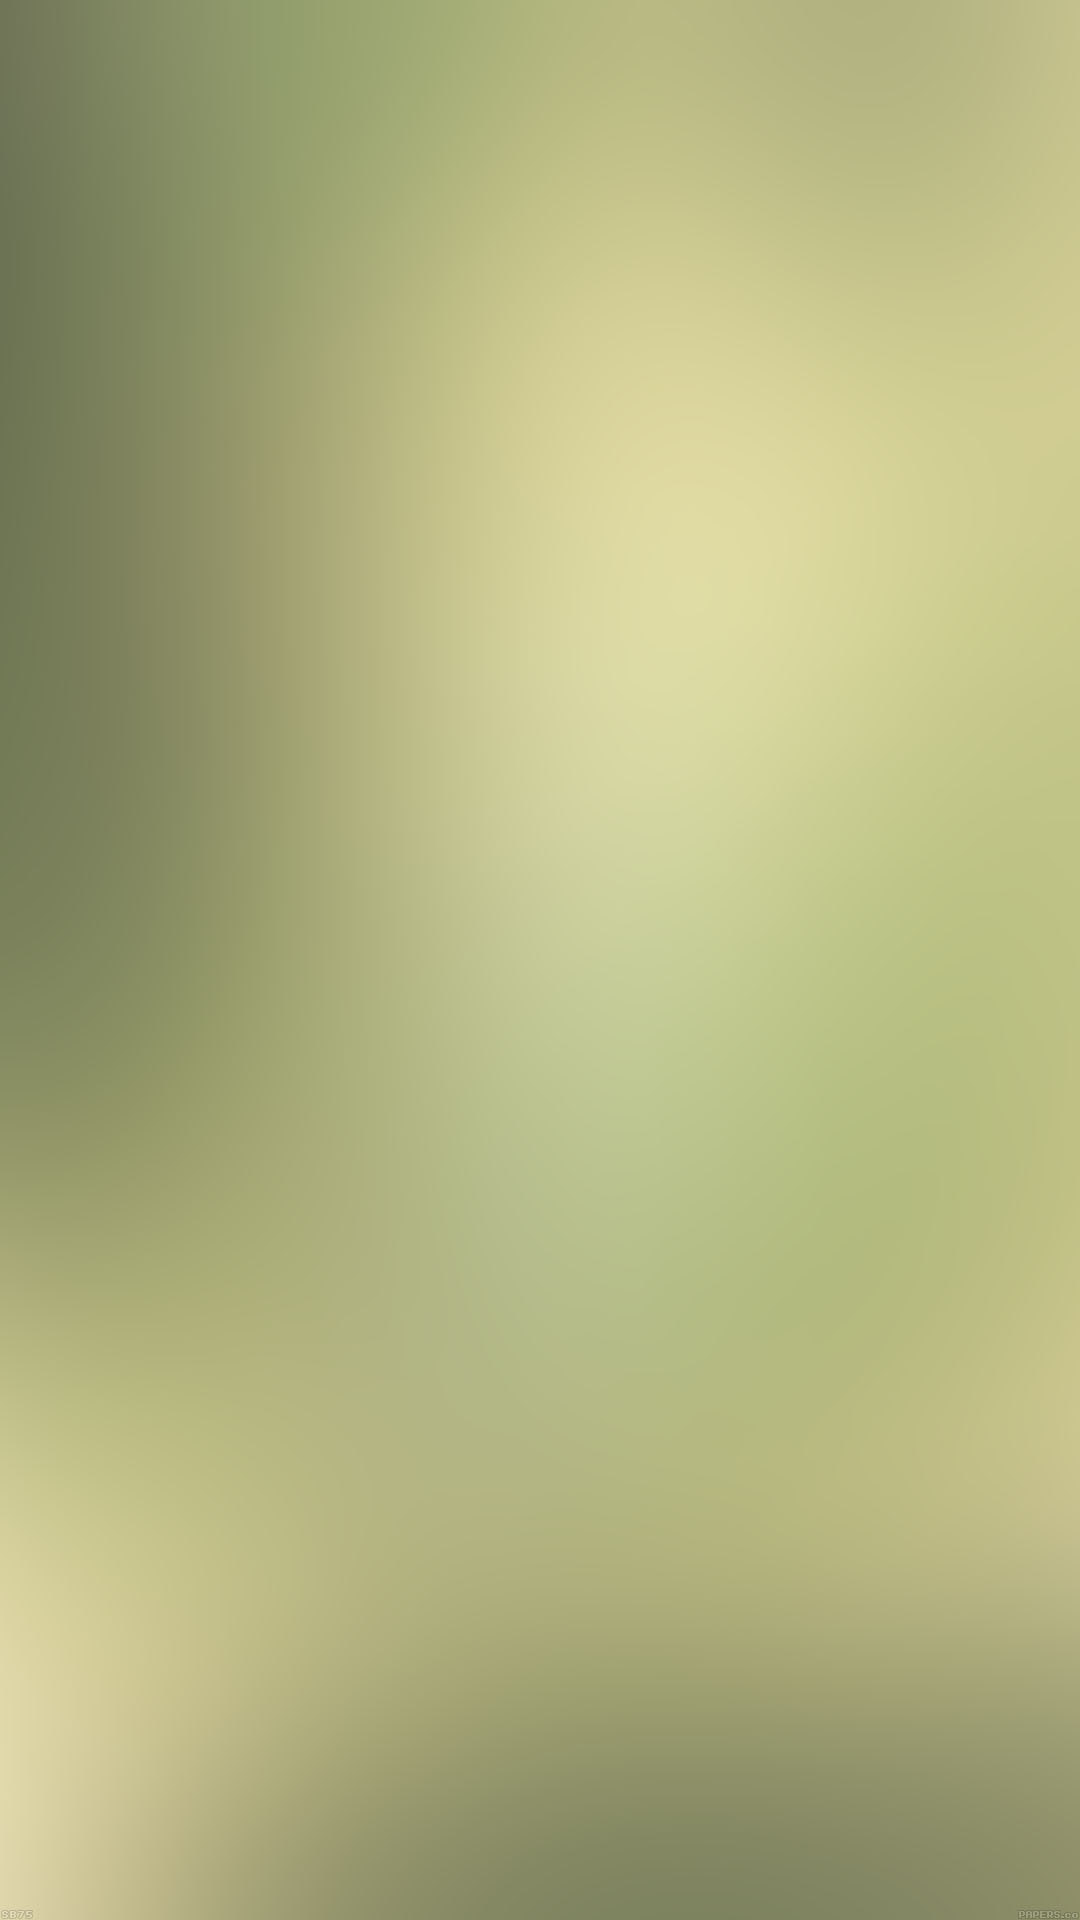 Leaf Nature Blur Android wallpaper